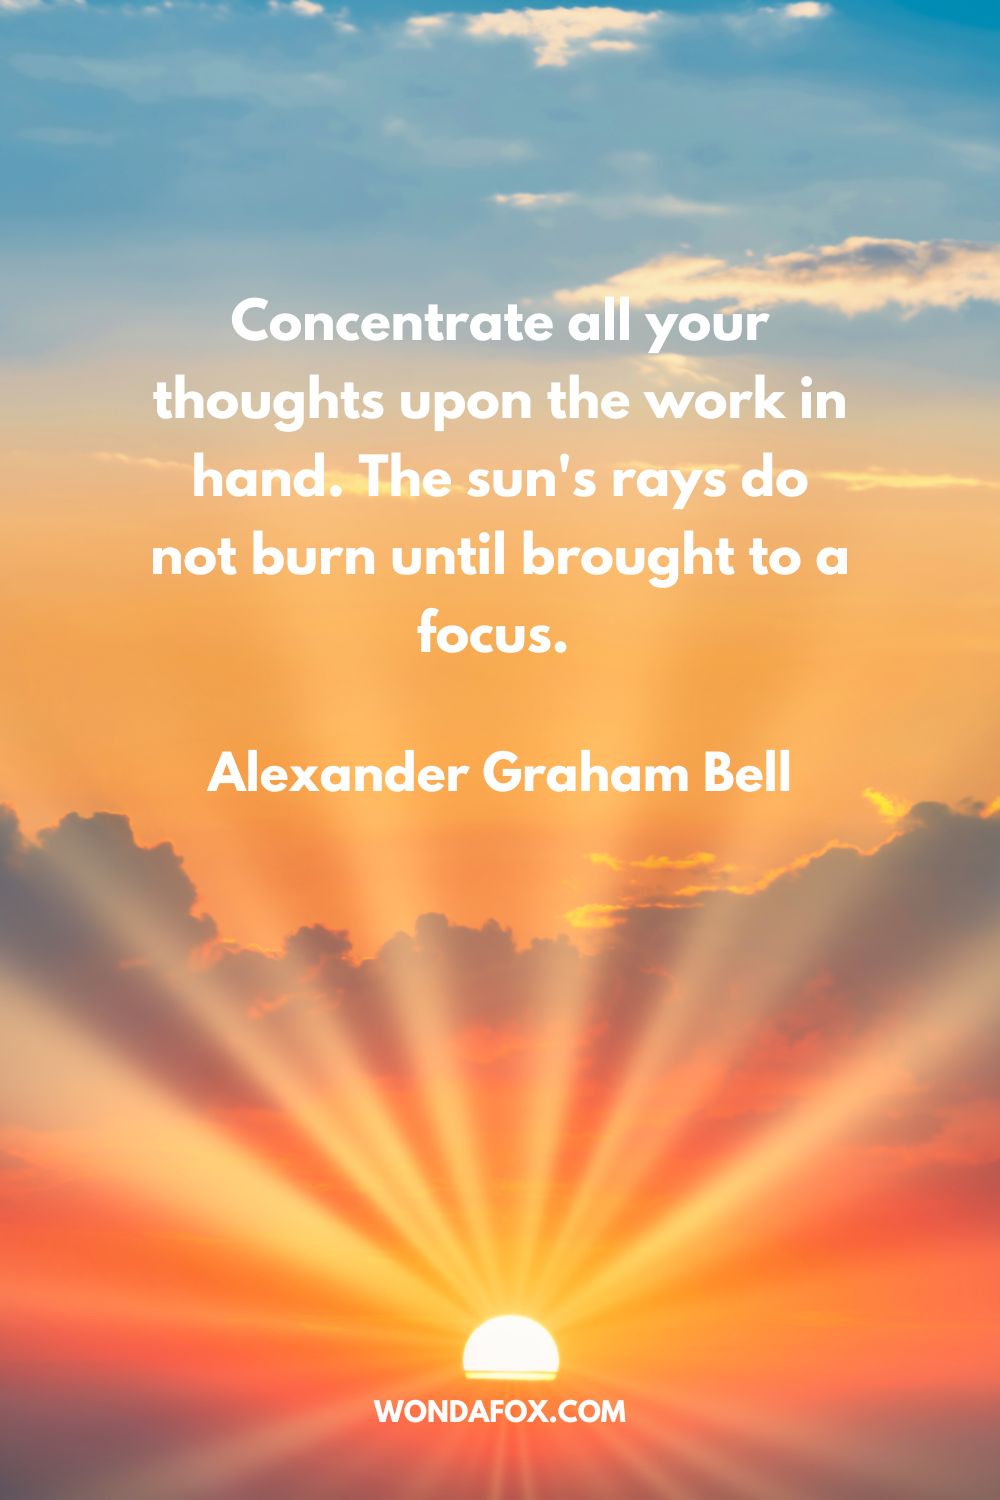 Concentrate all your thoughts upon the work in hand. The sun's rays do not burn until brought to a focus. Alexander Graham Bell